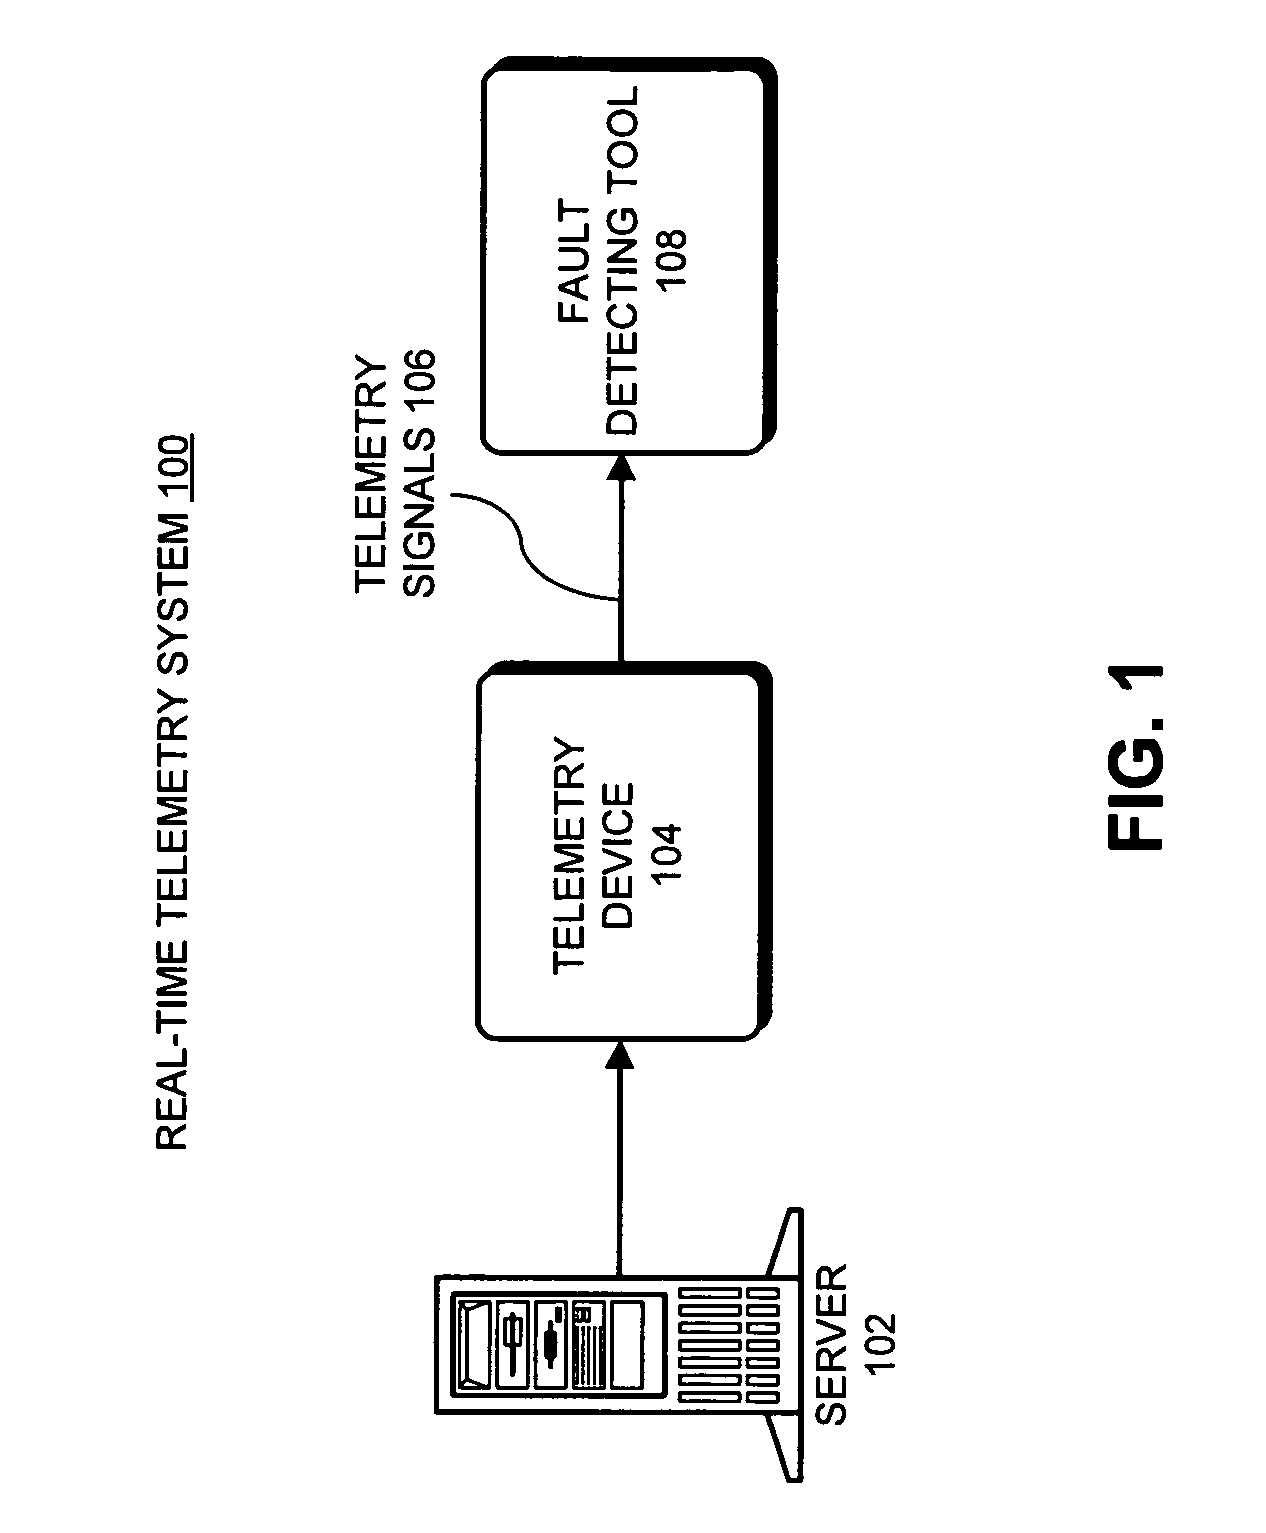 Method and apparatus for quantitatively determining severity of degradation in a signal